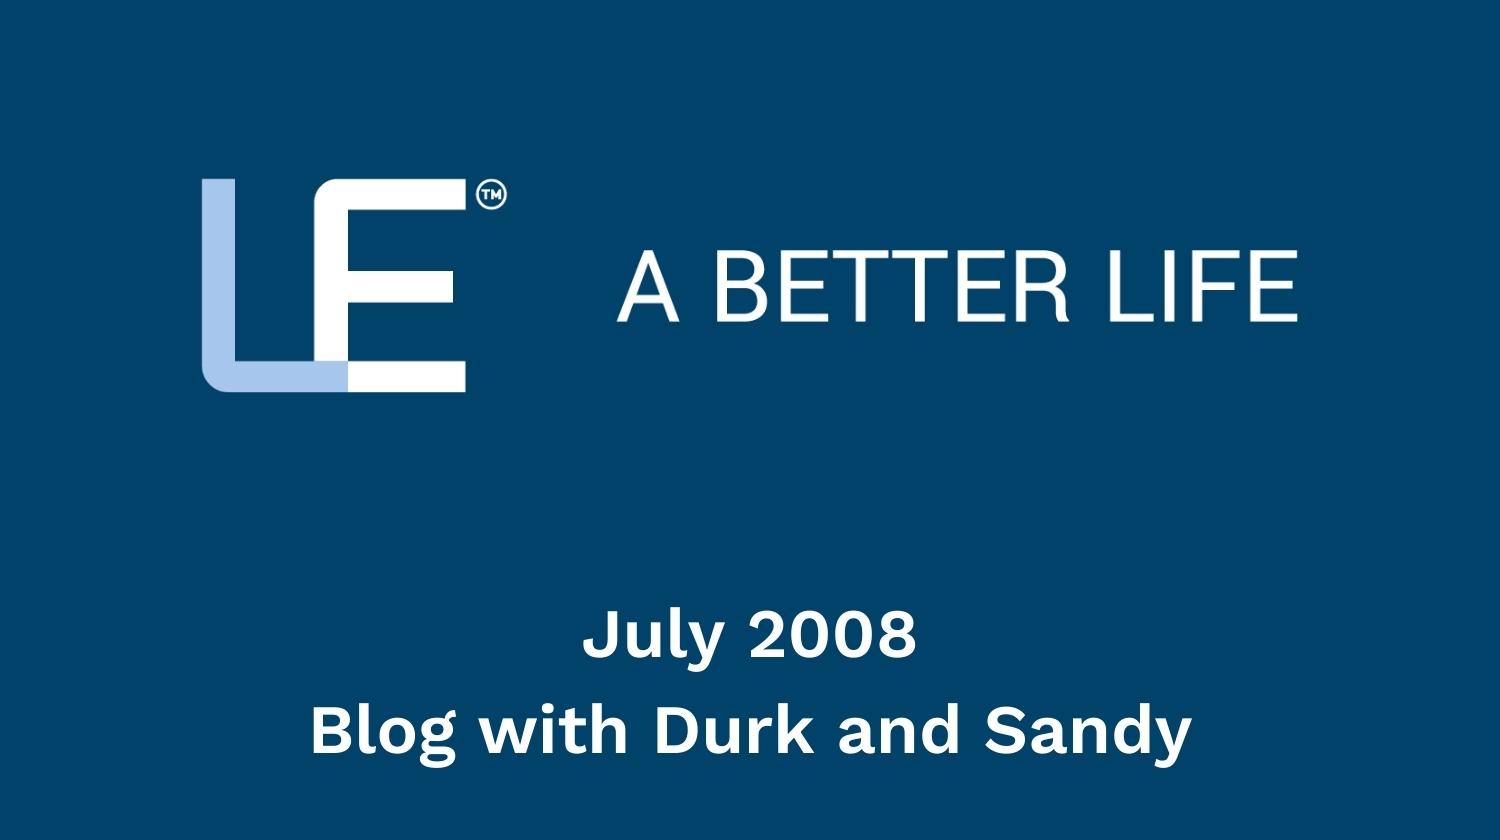 July 2008 Blog with Durk and Sandy